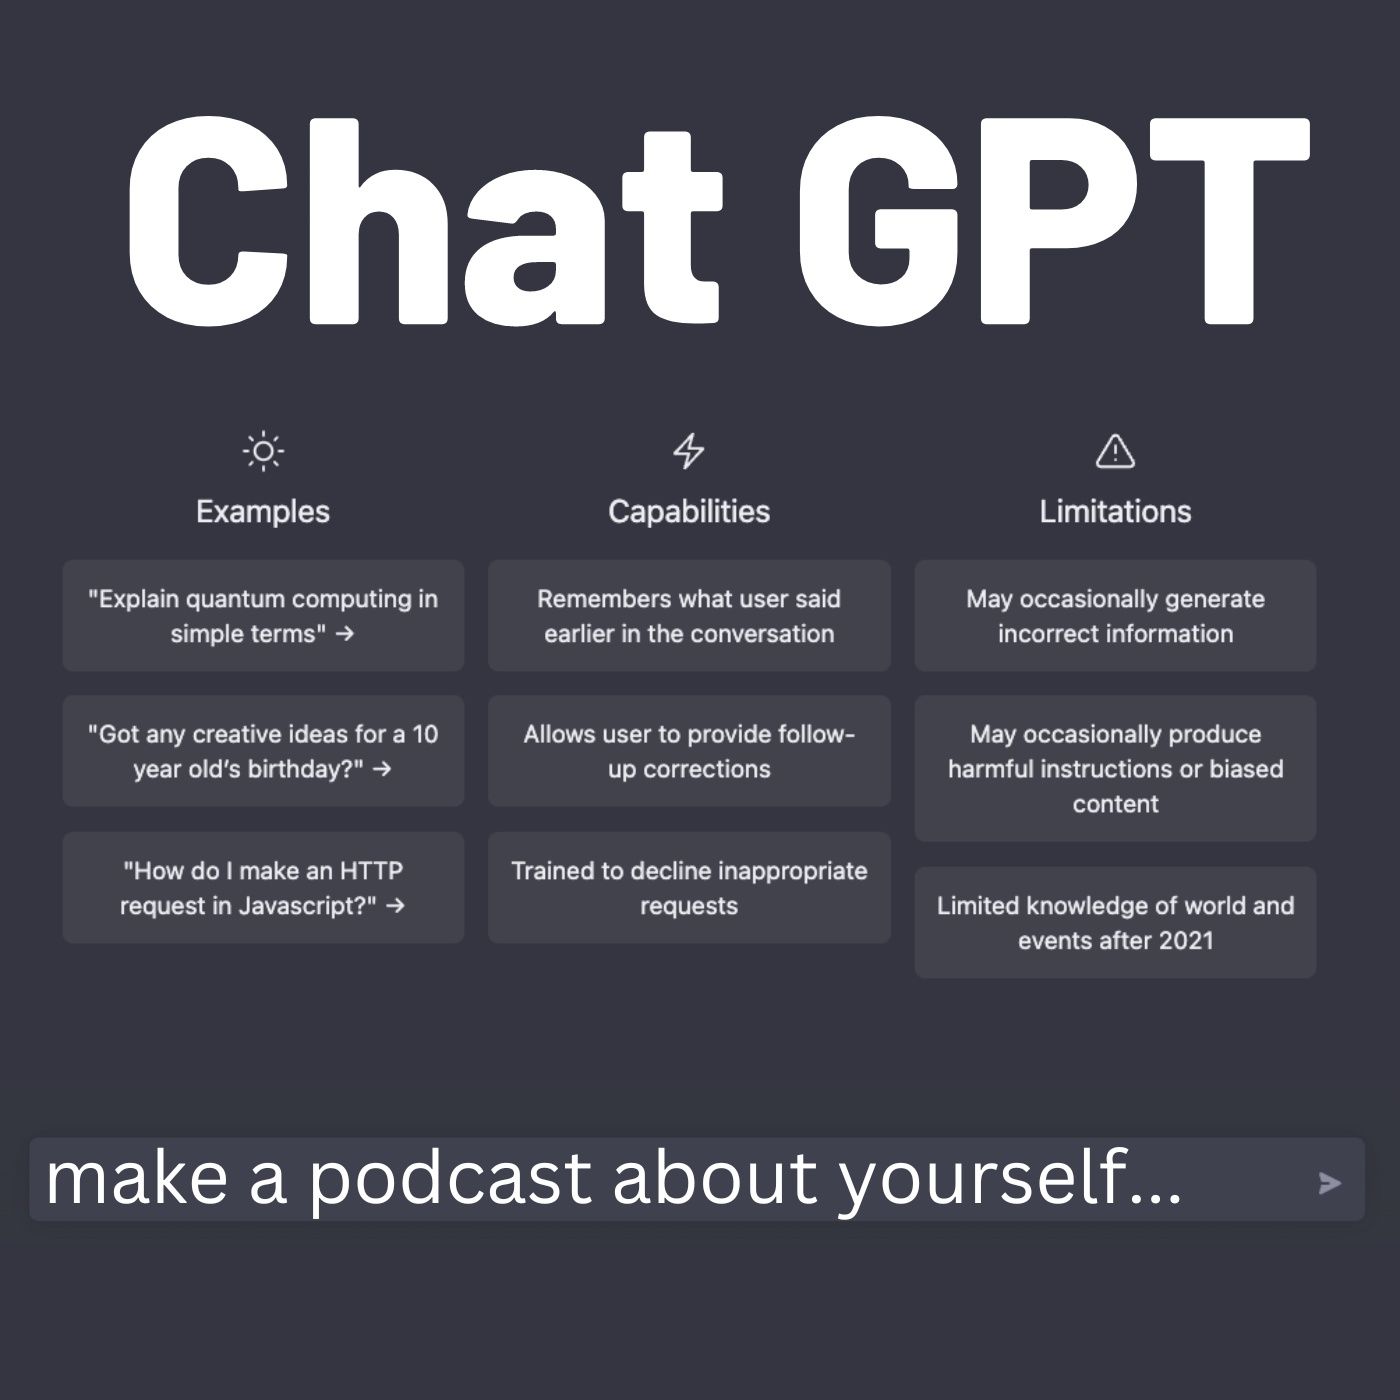 how to make a presentation on chat gpt